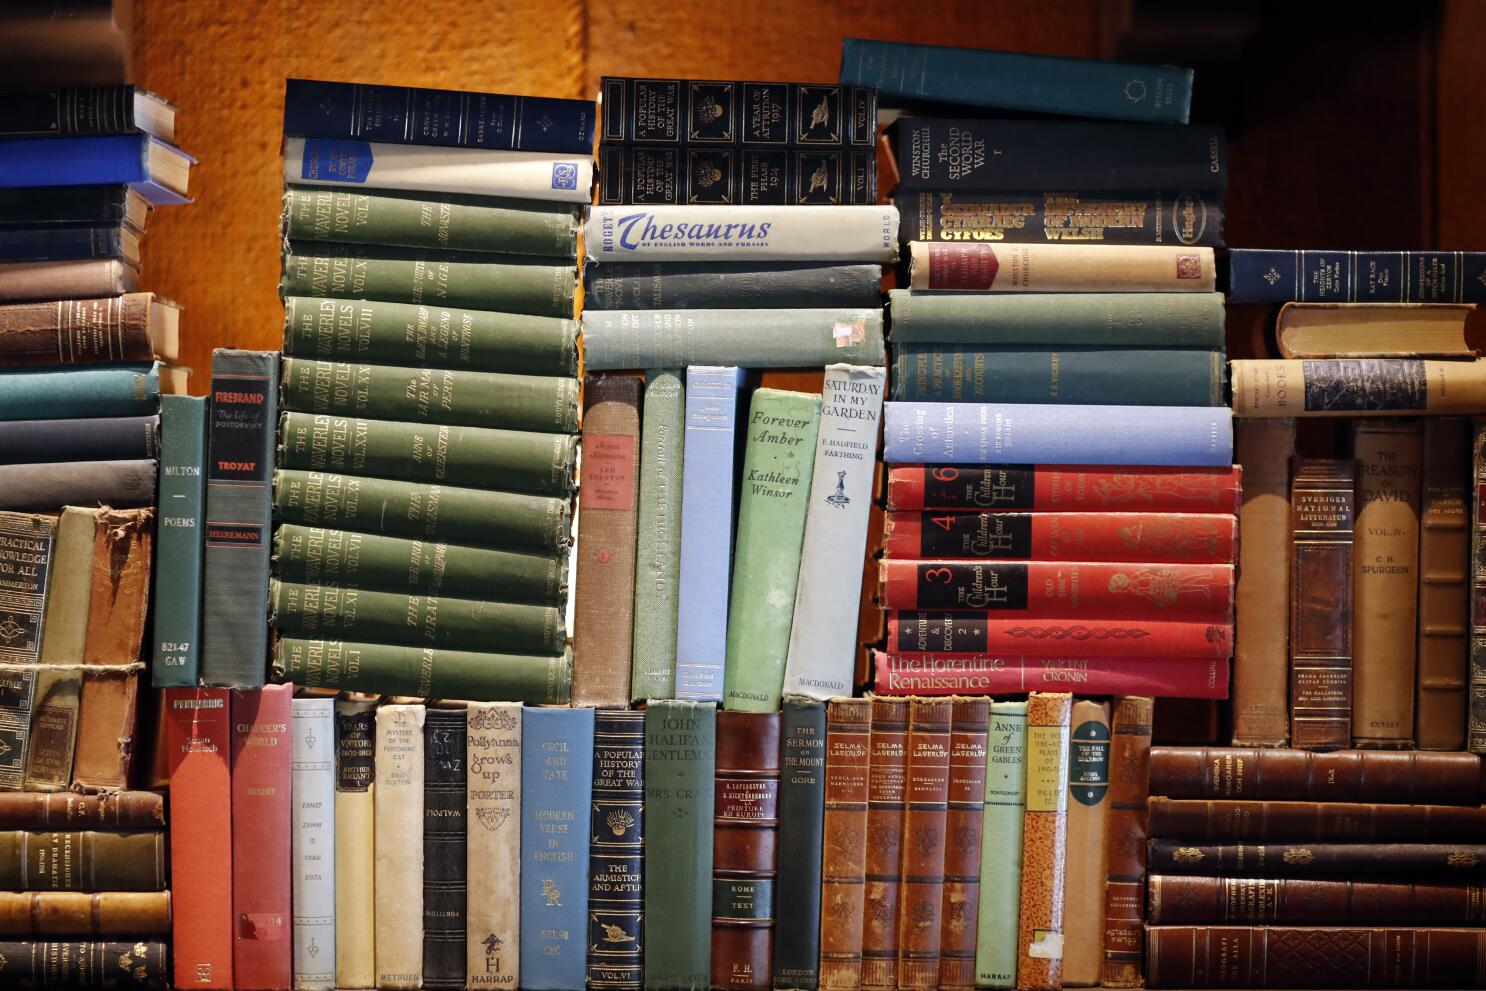 Opinion: Why do I hoard more books than I could possibly read? An